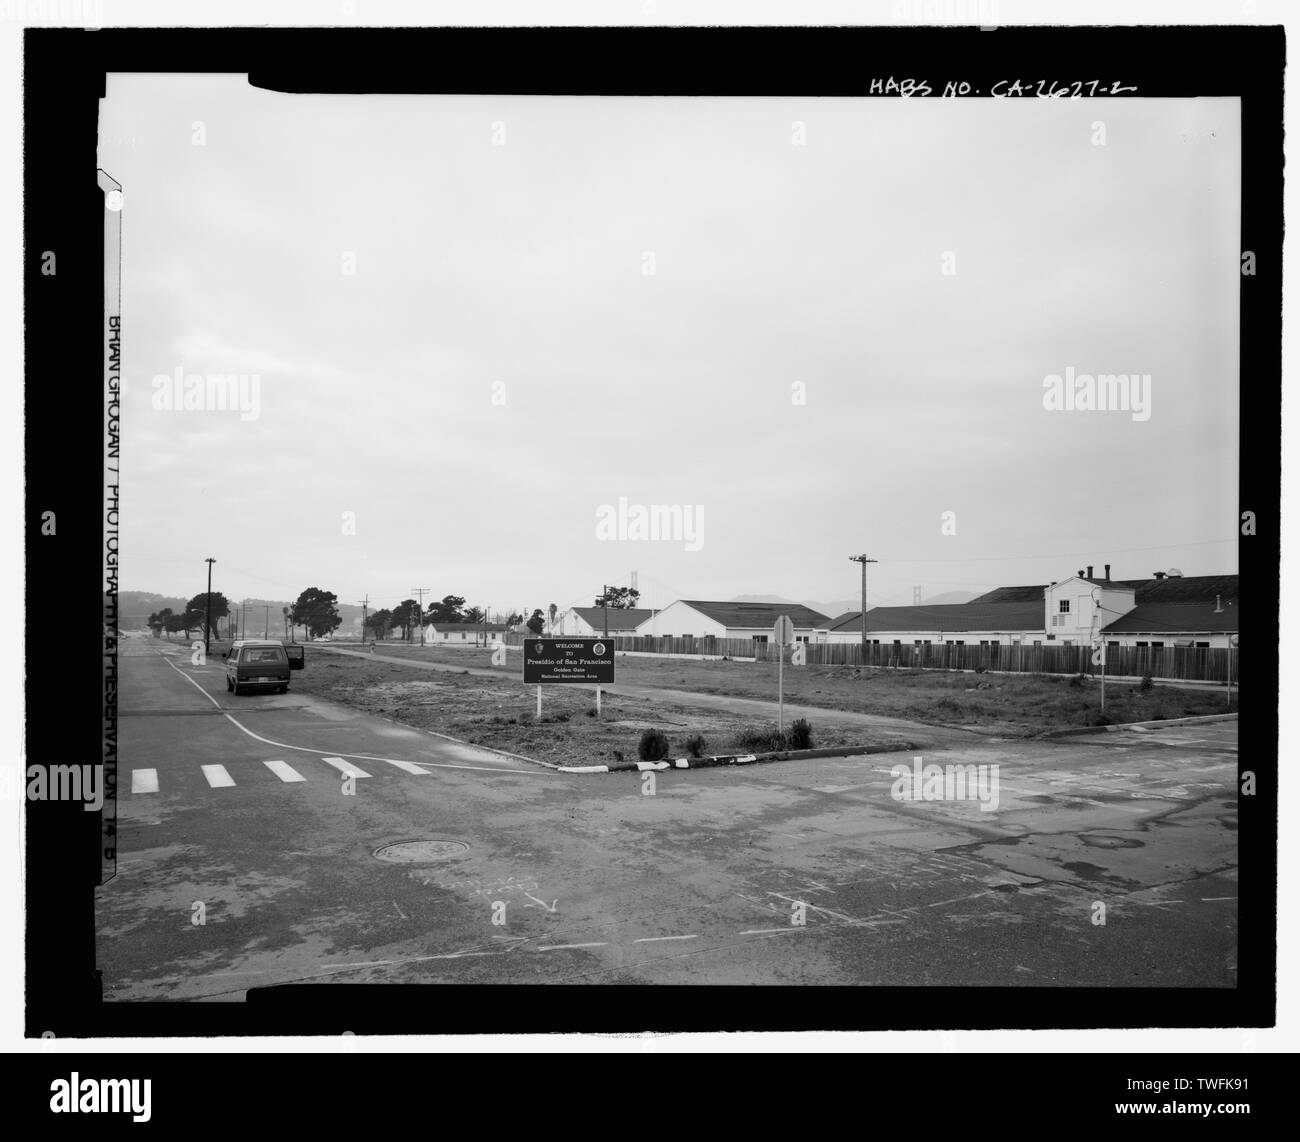 Presidio of san francisco Cut Out Stock Images & Pictures - Alamy